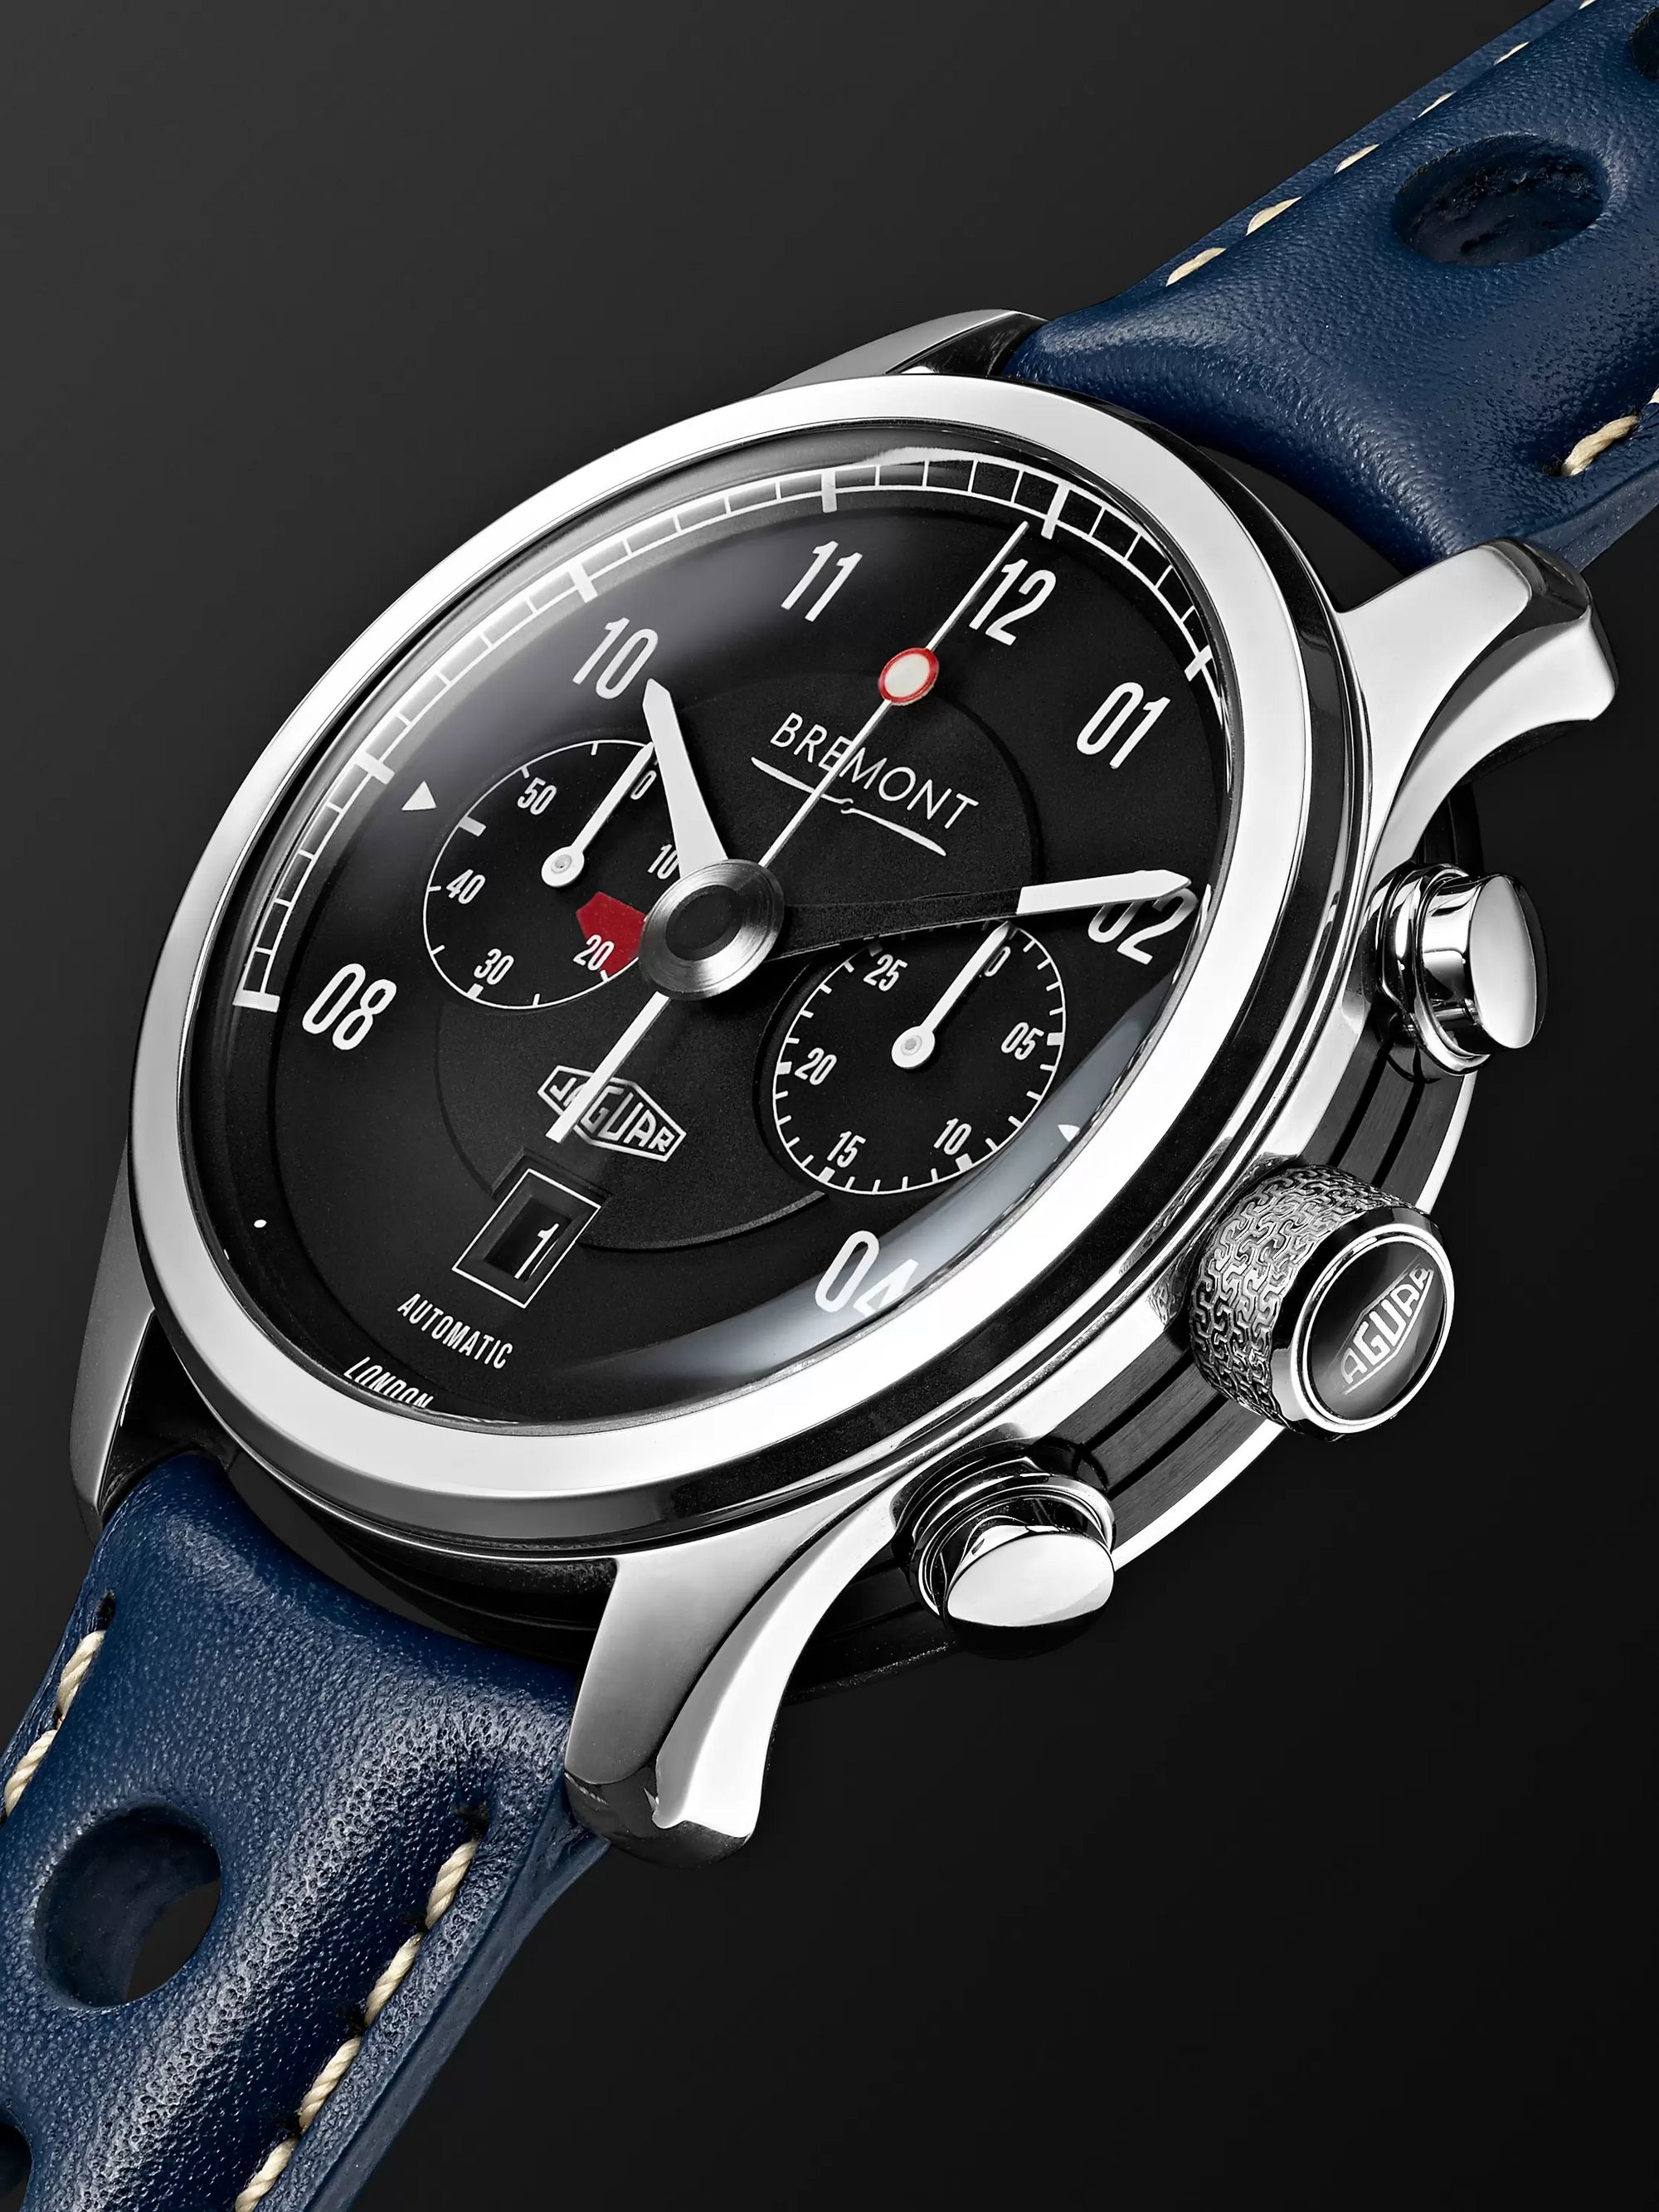 BREMONT MKII Jaguar Automatic Chronograph 43mm Stainless Steel and Leather Watch, Ref. No. J-MKII-BK-R-S